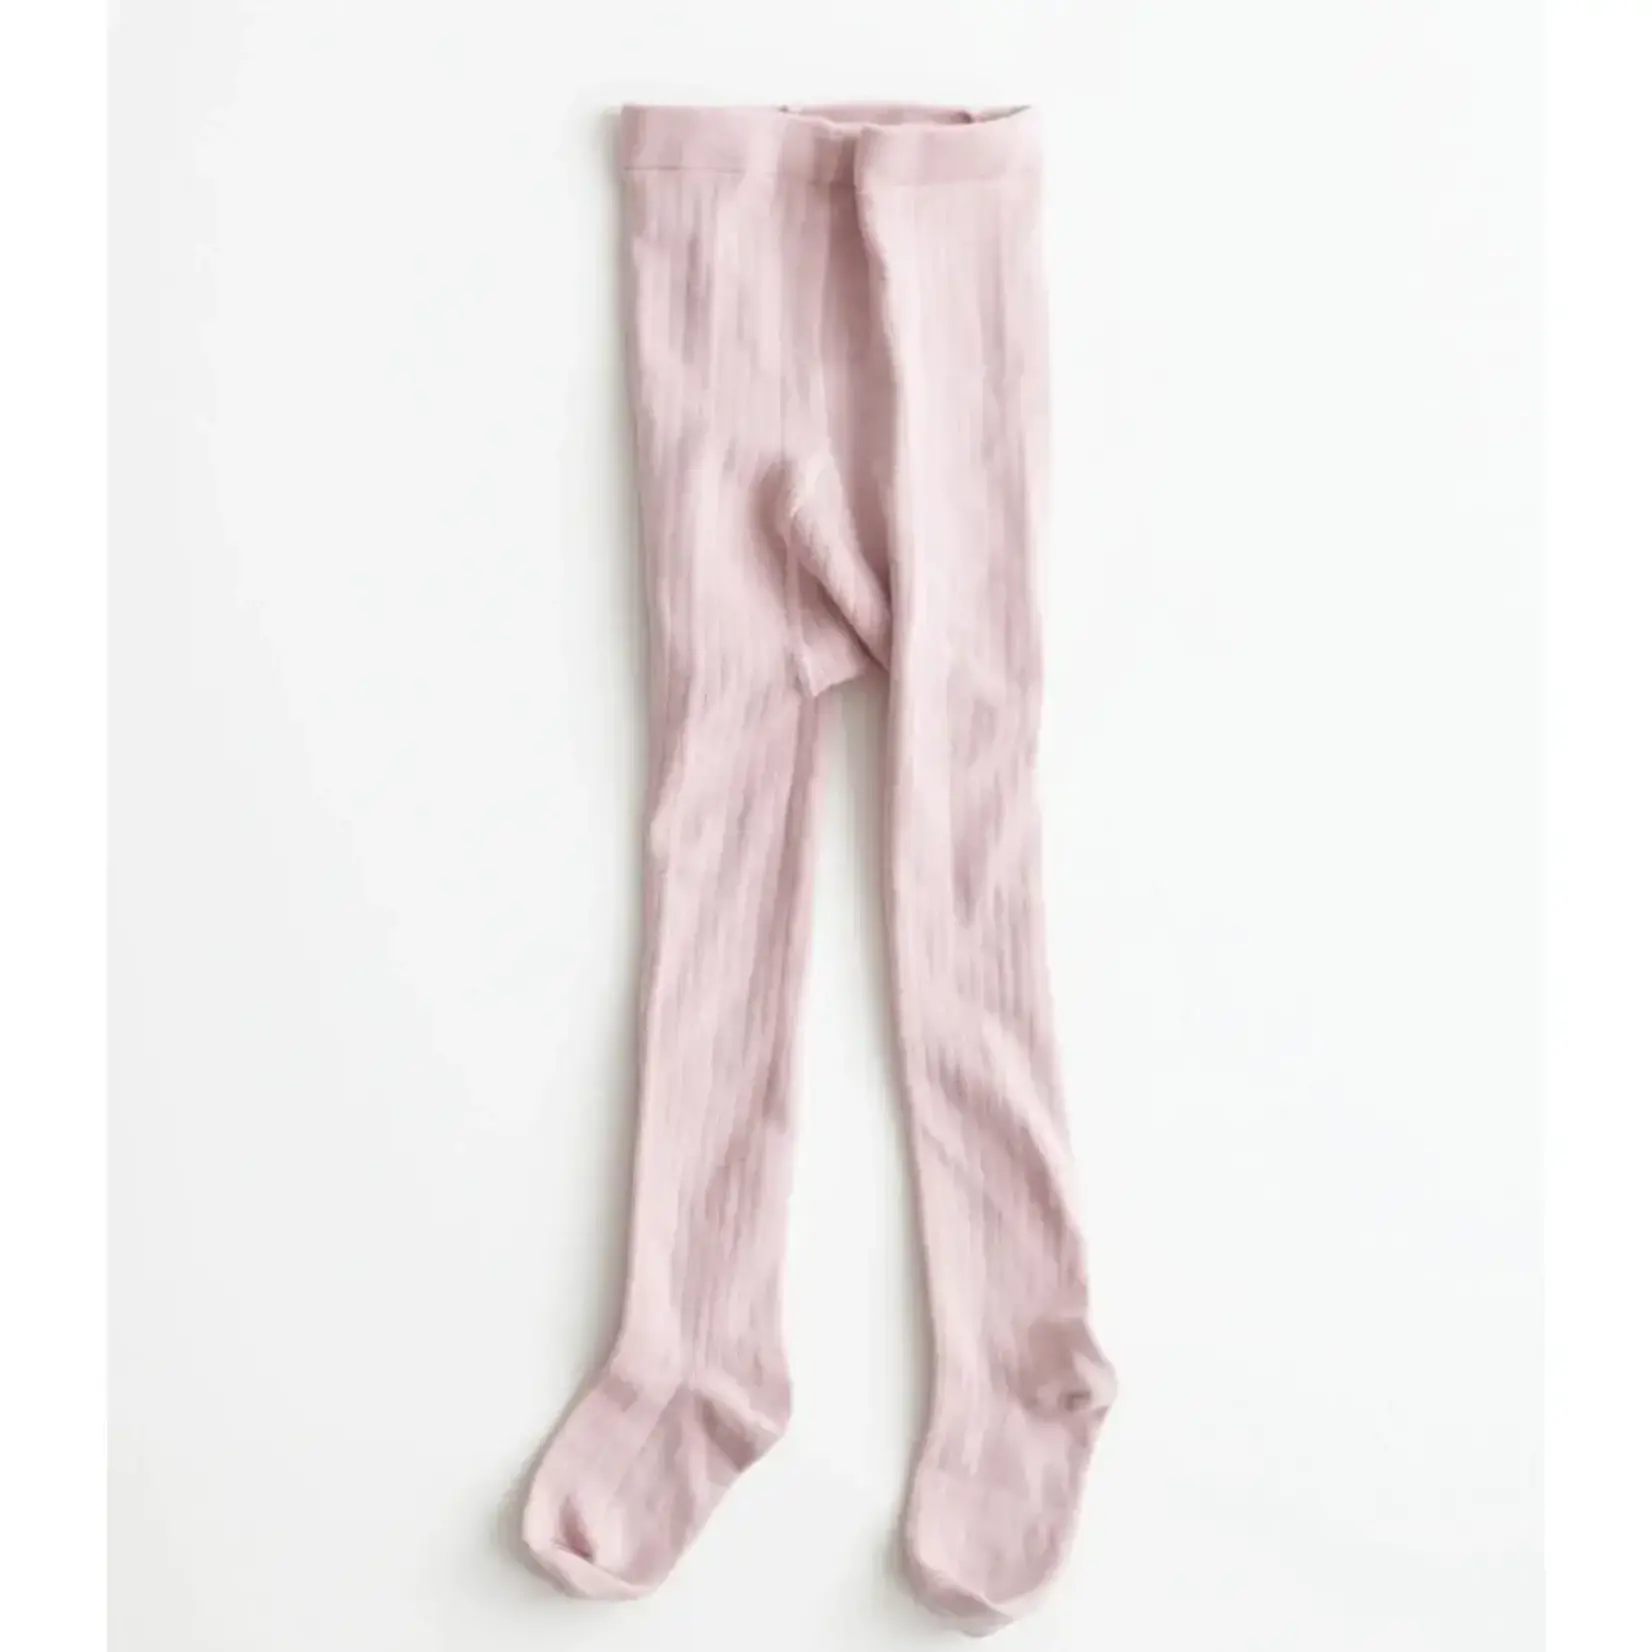 Lali Cotton Tights - Pink - 6M